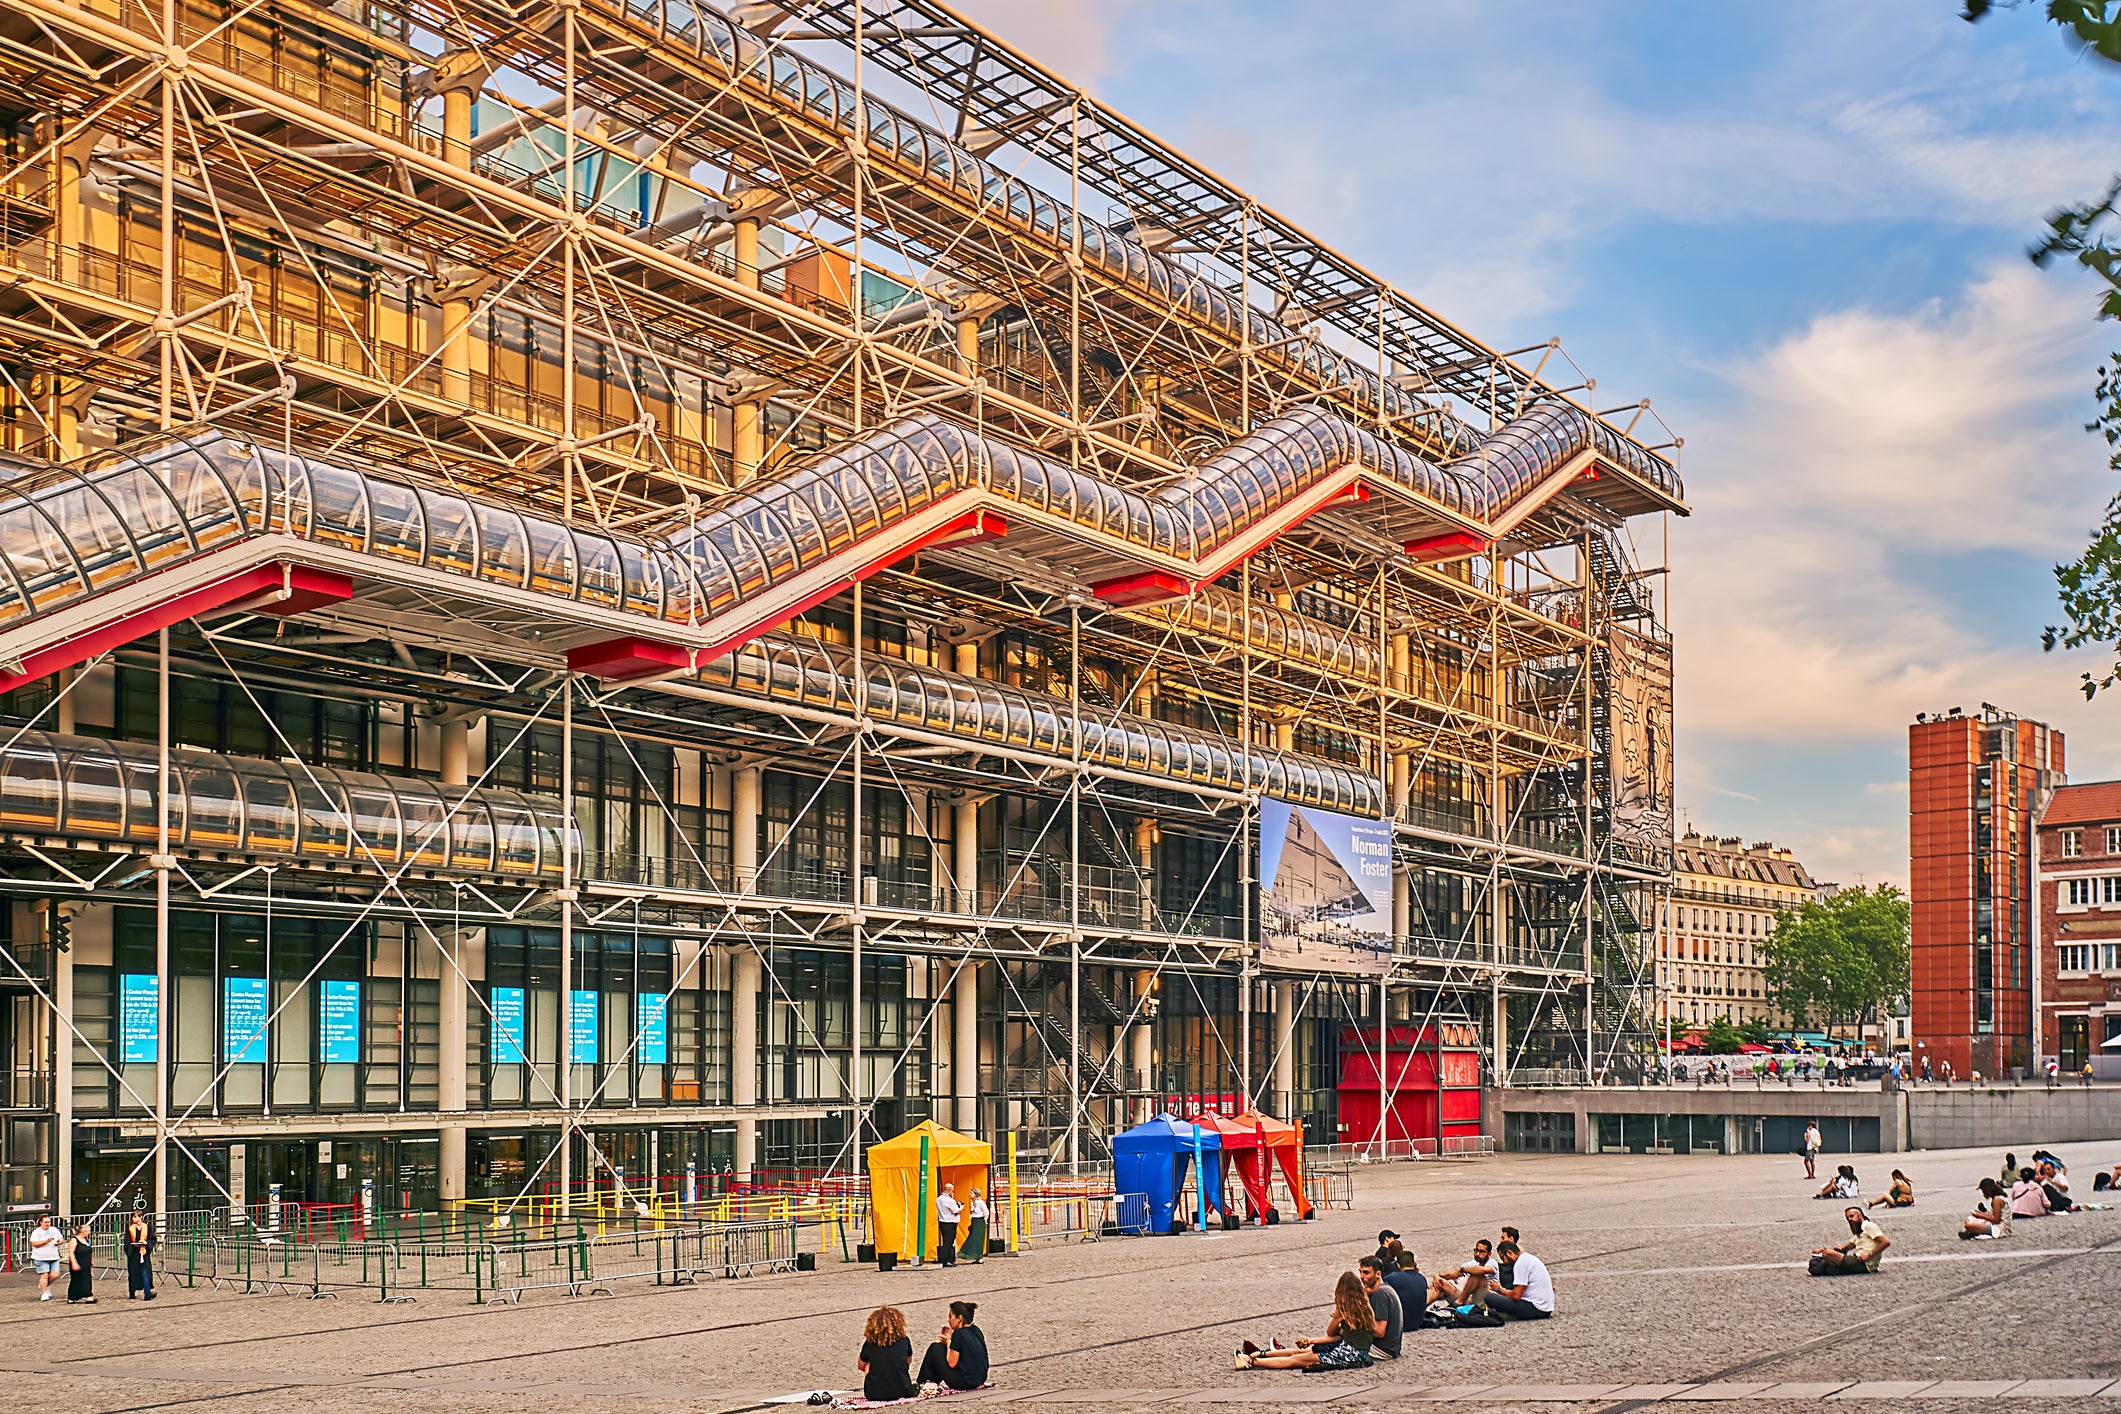 The distinctive Centre Pompidou is home to France’s National Museum of Modern Art